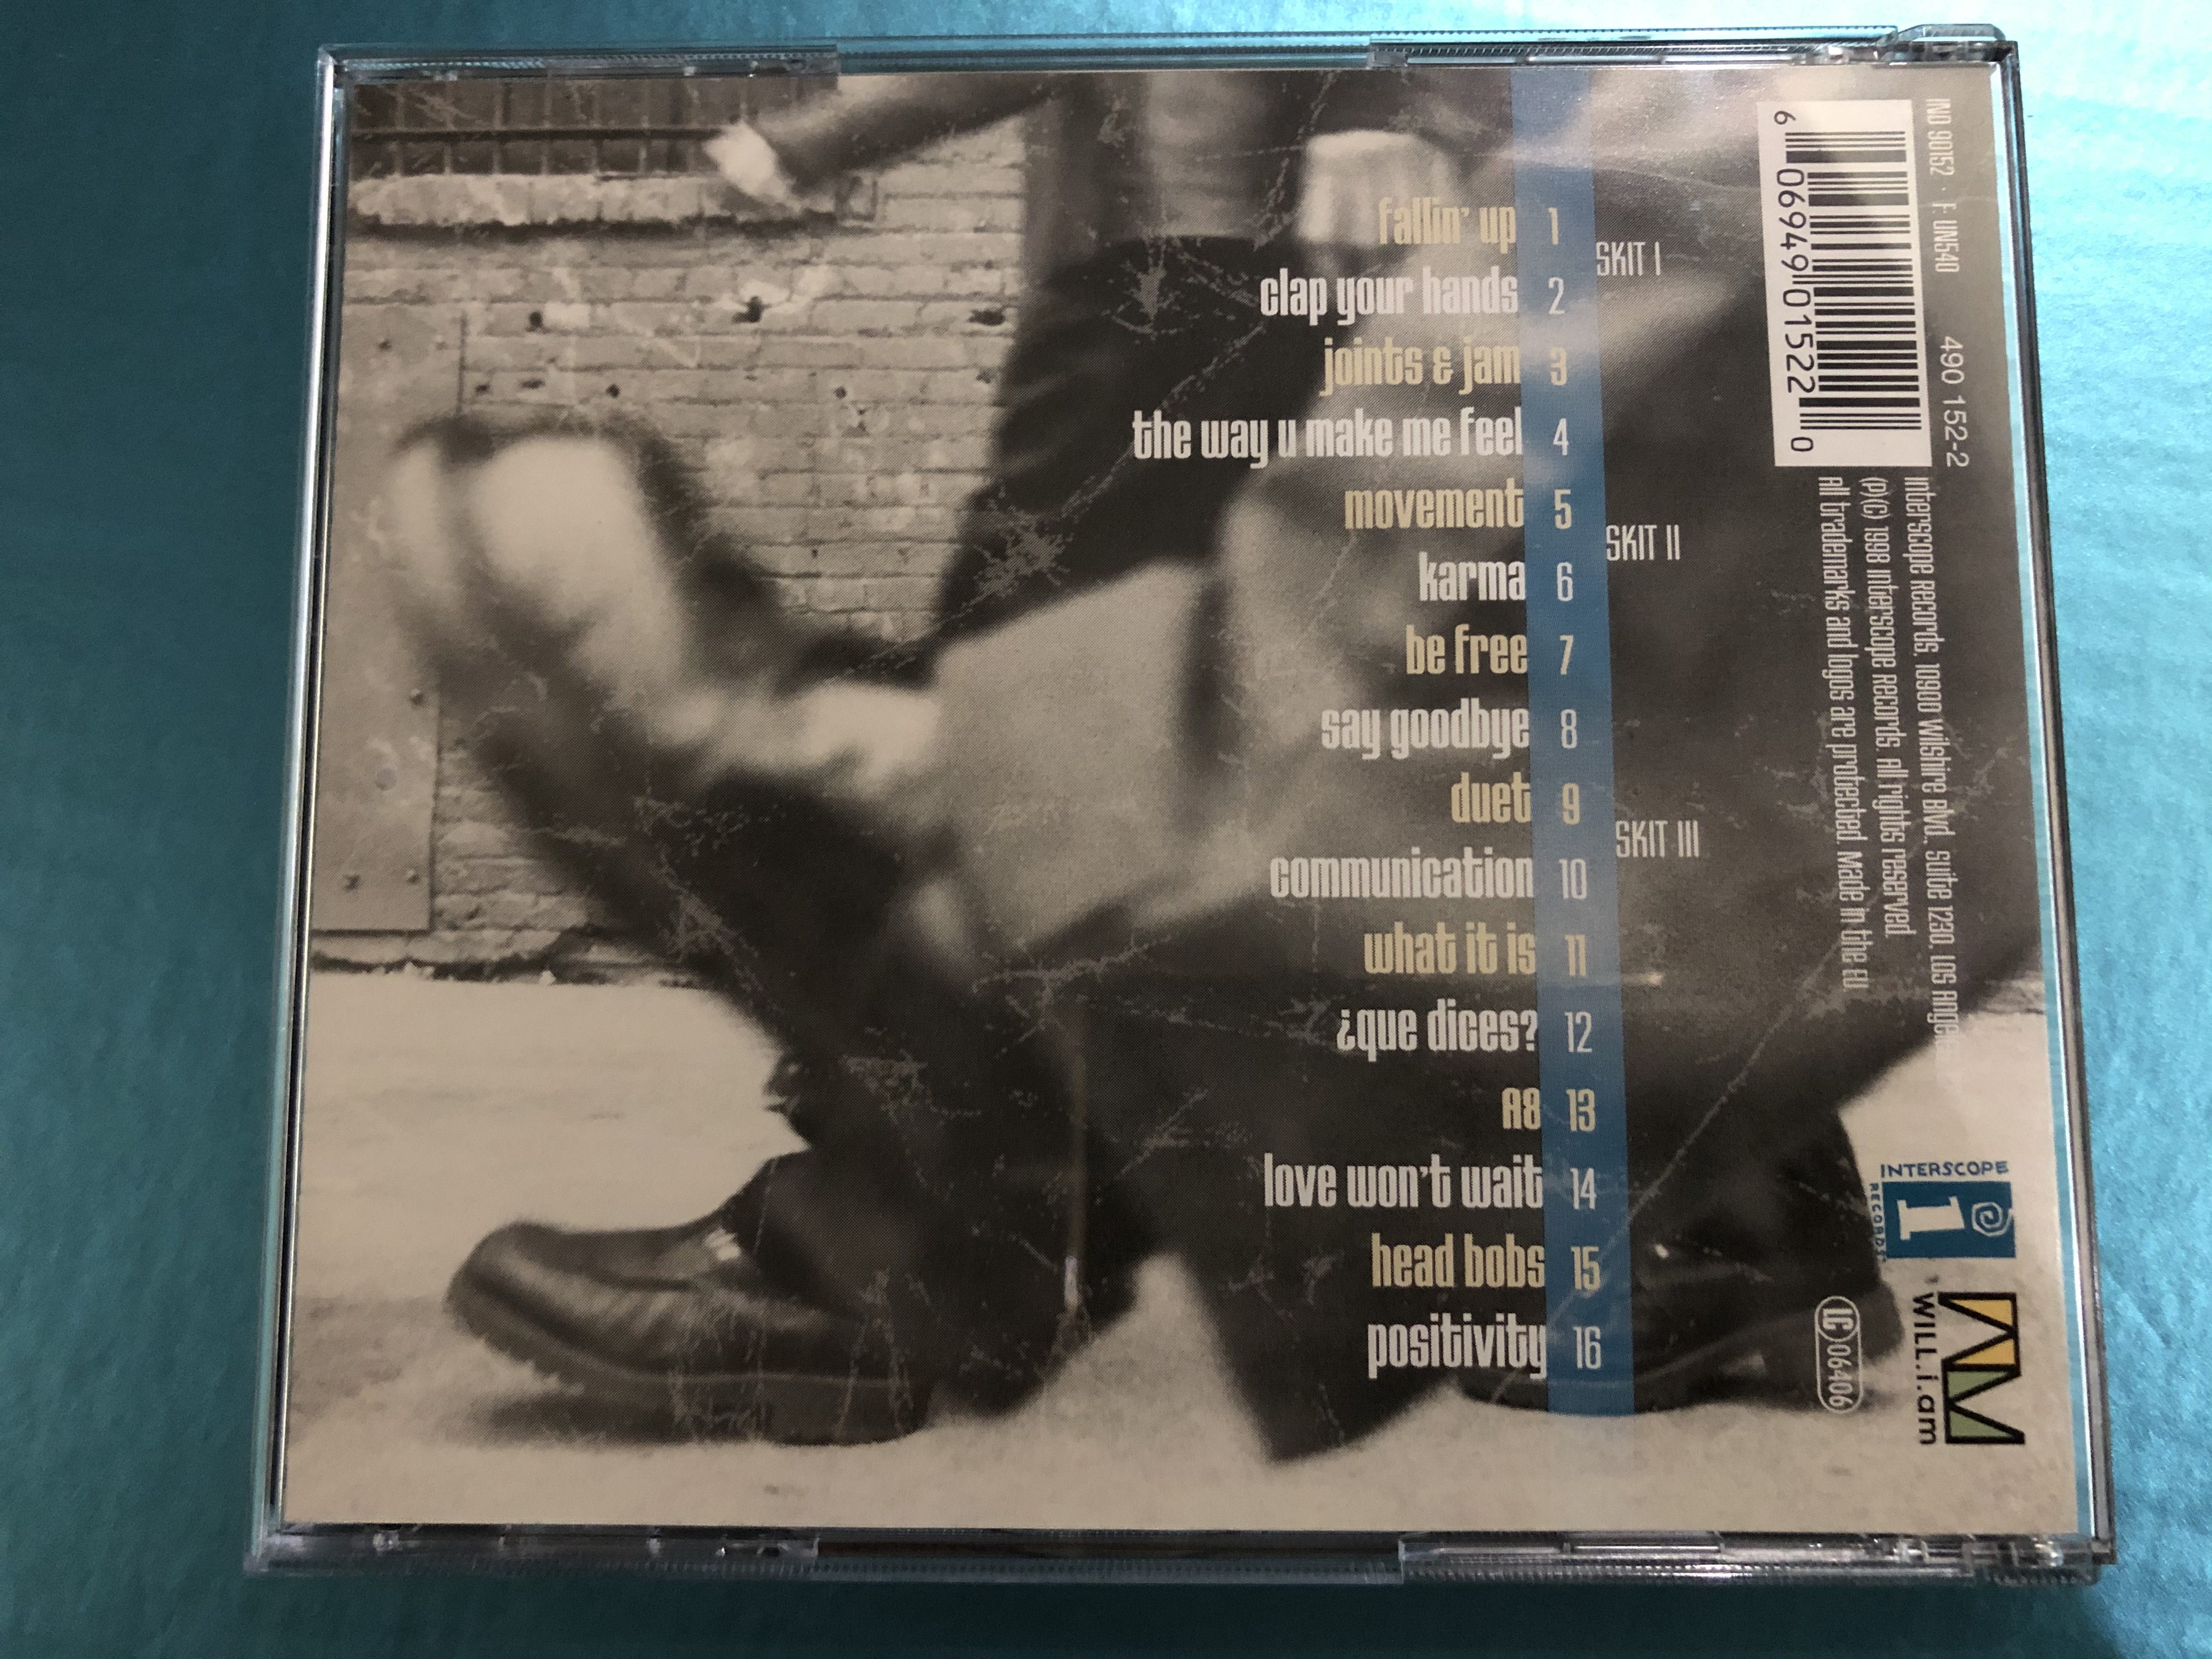 recorded-in-visual-stereo-sound-black-eyed-peas-behind-the-front-interscope-records-audio-cd-1998-intd-90152-2-.jpg